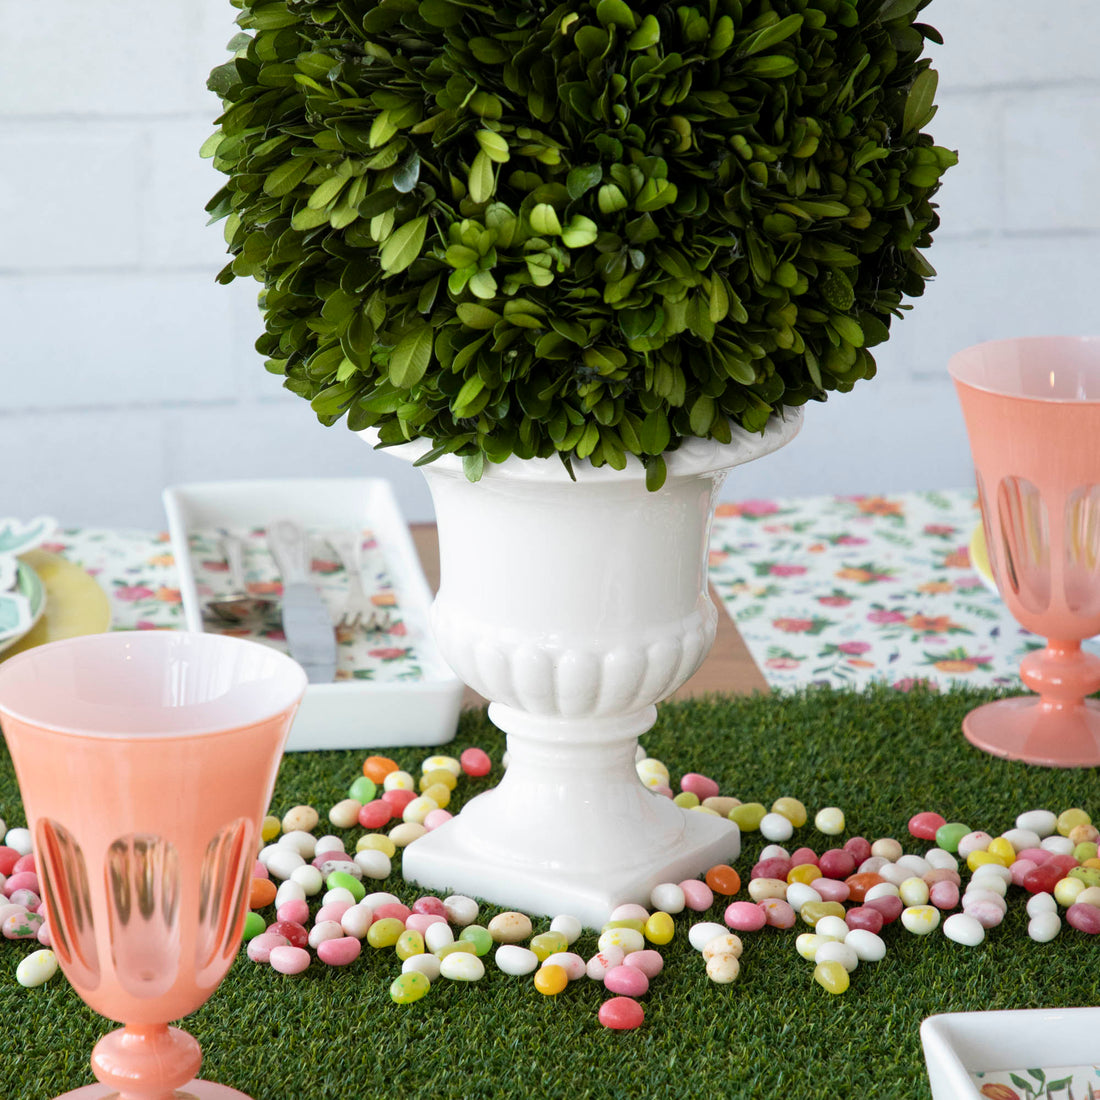 An easter table setting with a pink vase and candy, adorned with a Talking Tables Artificial Grass Table Runner centerpiece and party-themed table runner.